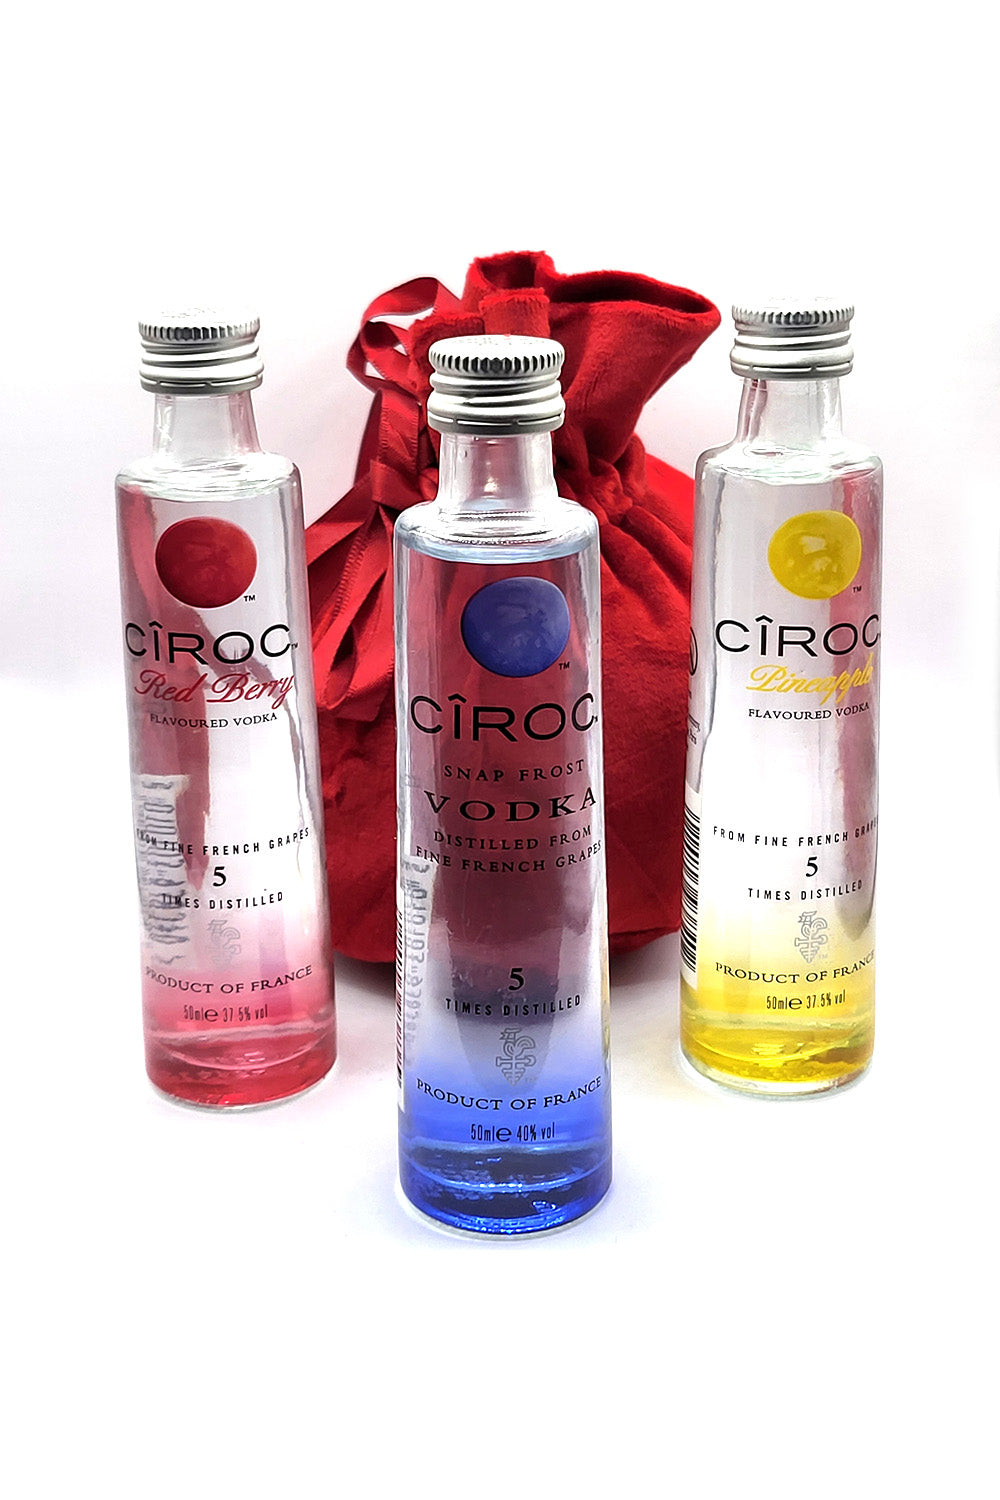 Ciroc Trio Miniature Set in Red Velvet Bag ( Red Cherry/Snap Frost/Pineapple )